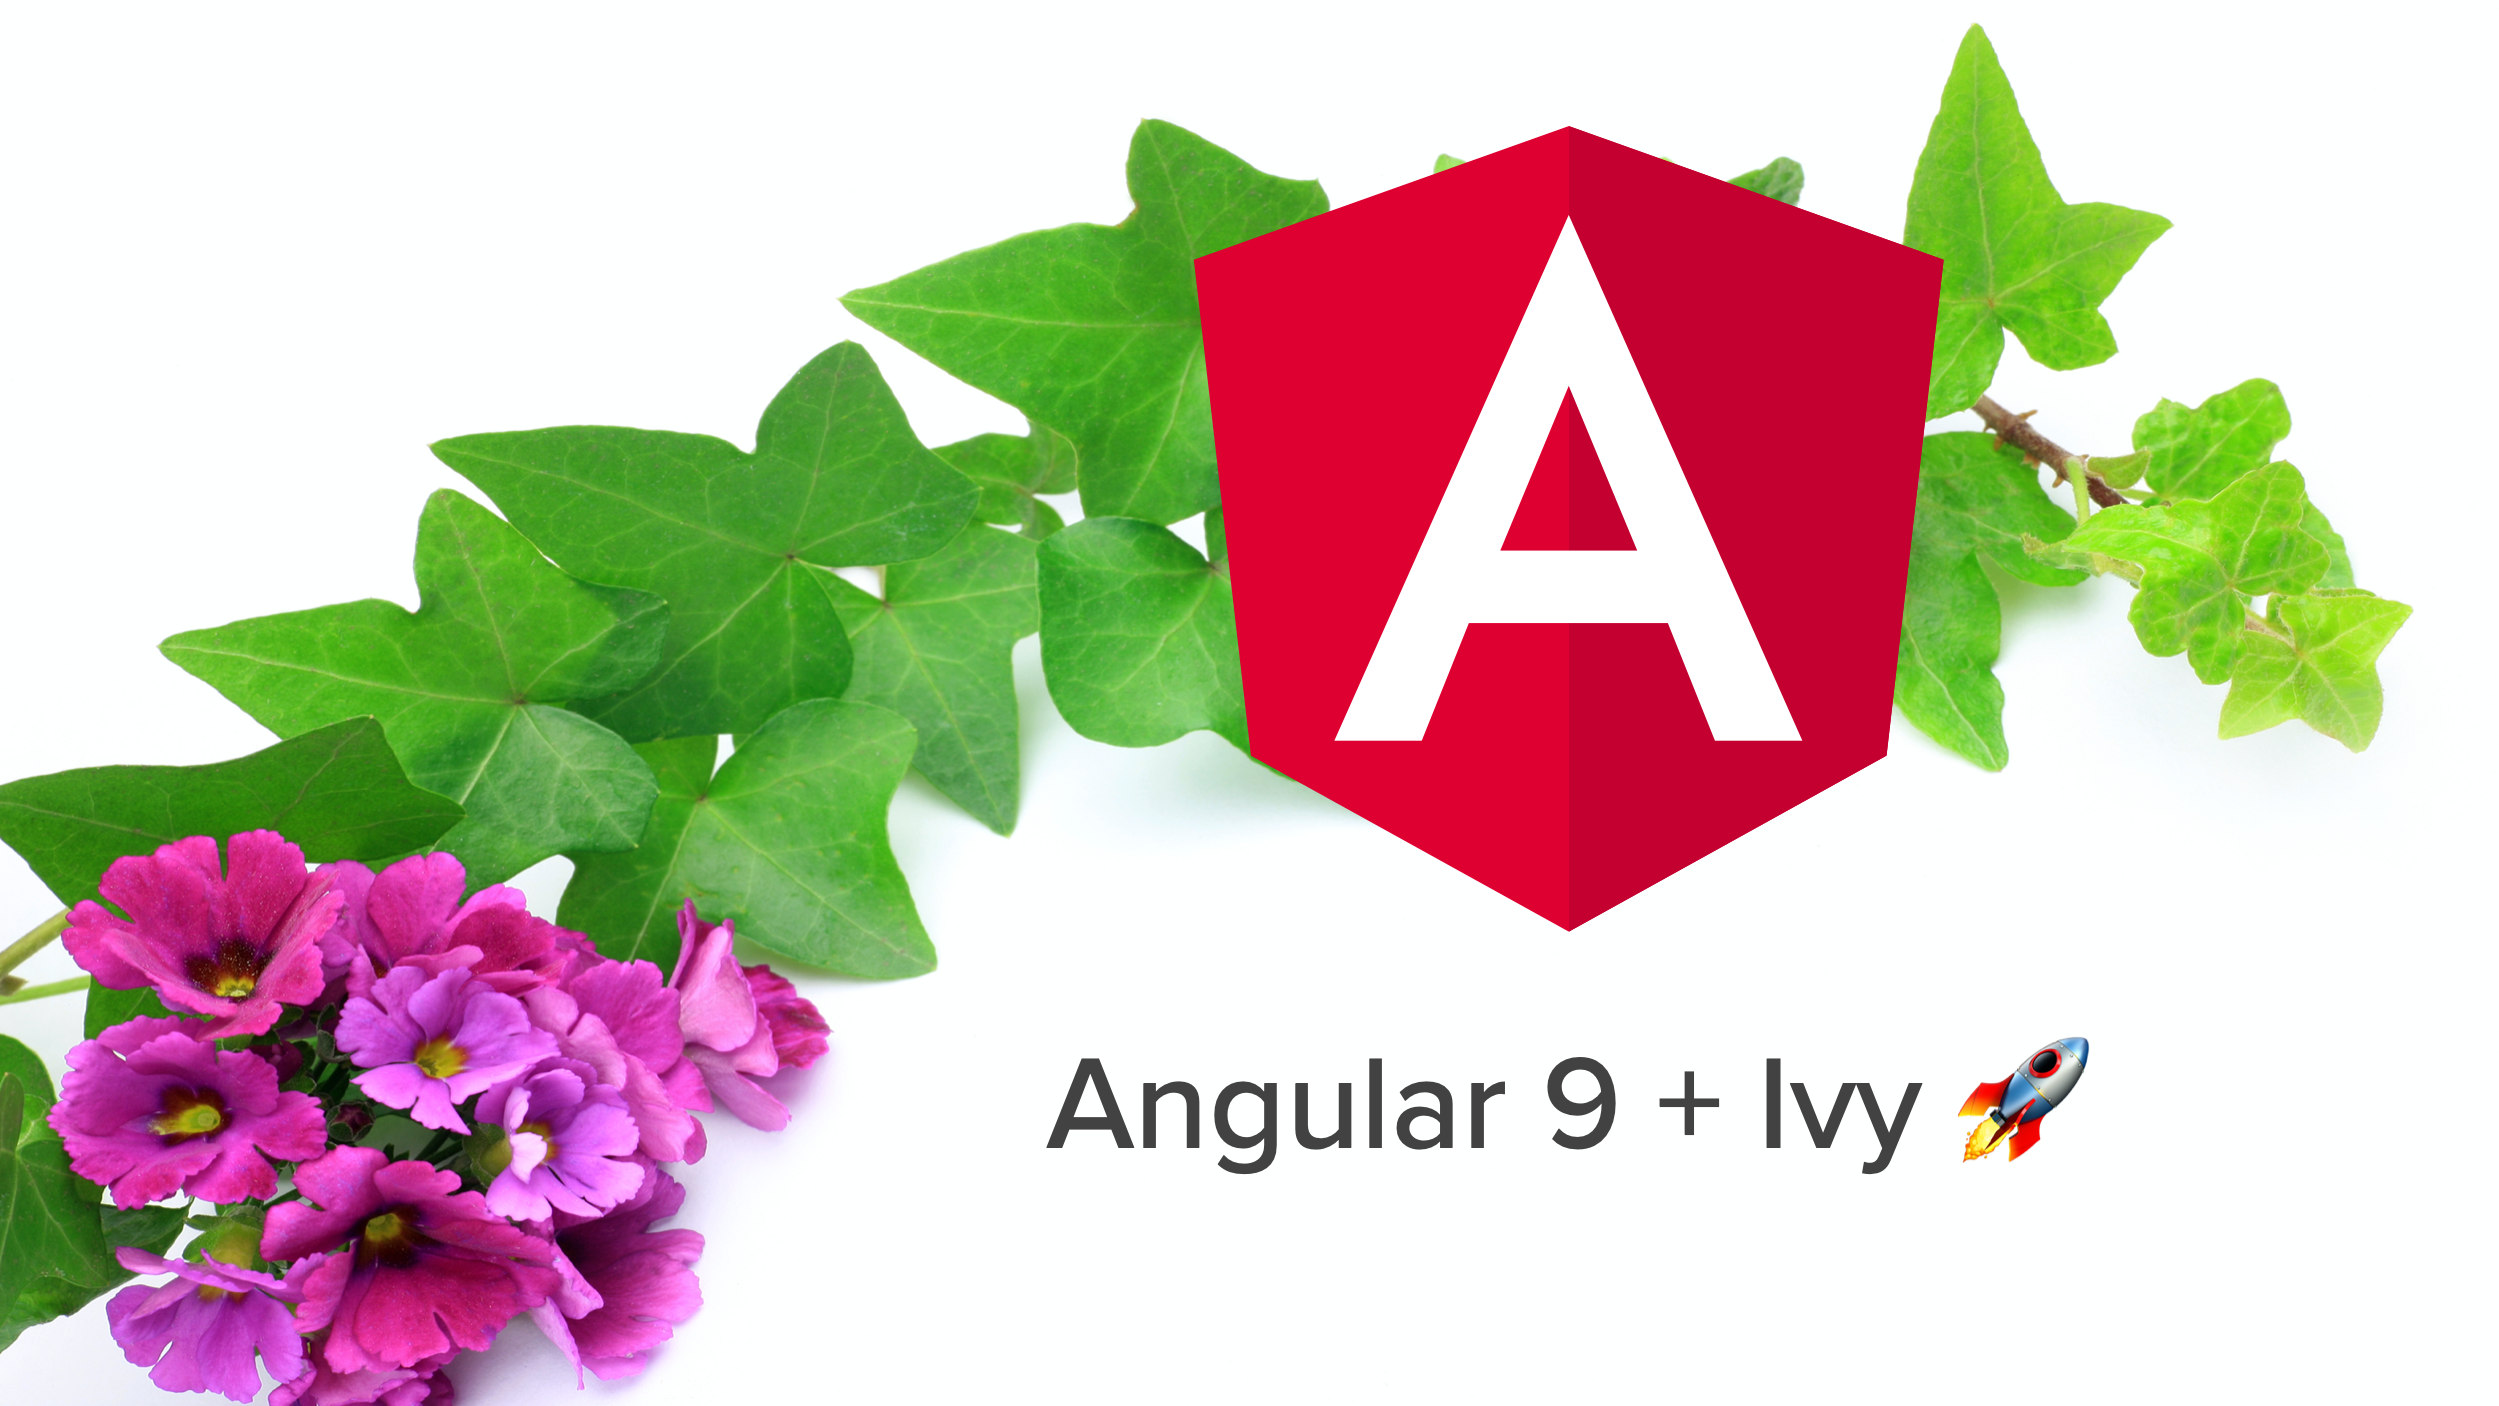 What Is Angular Ivy and Why Is It Awesome?